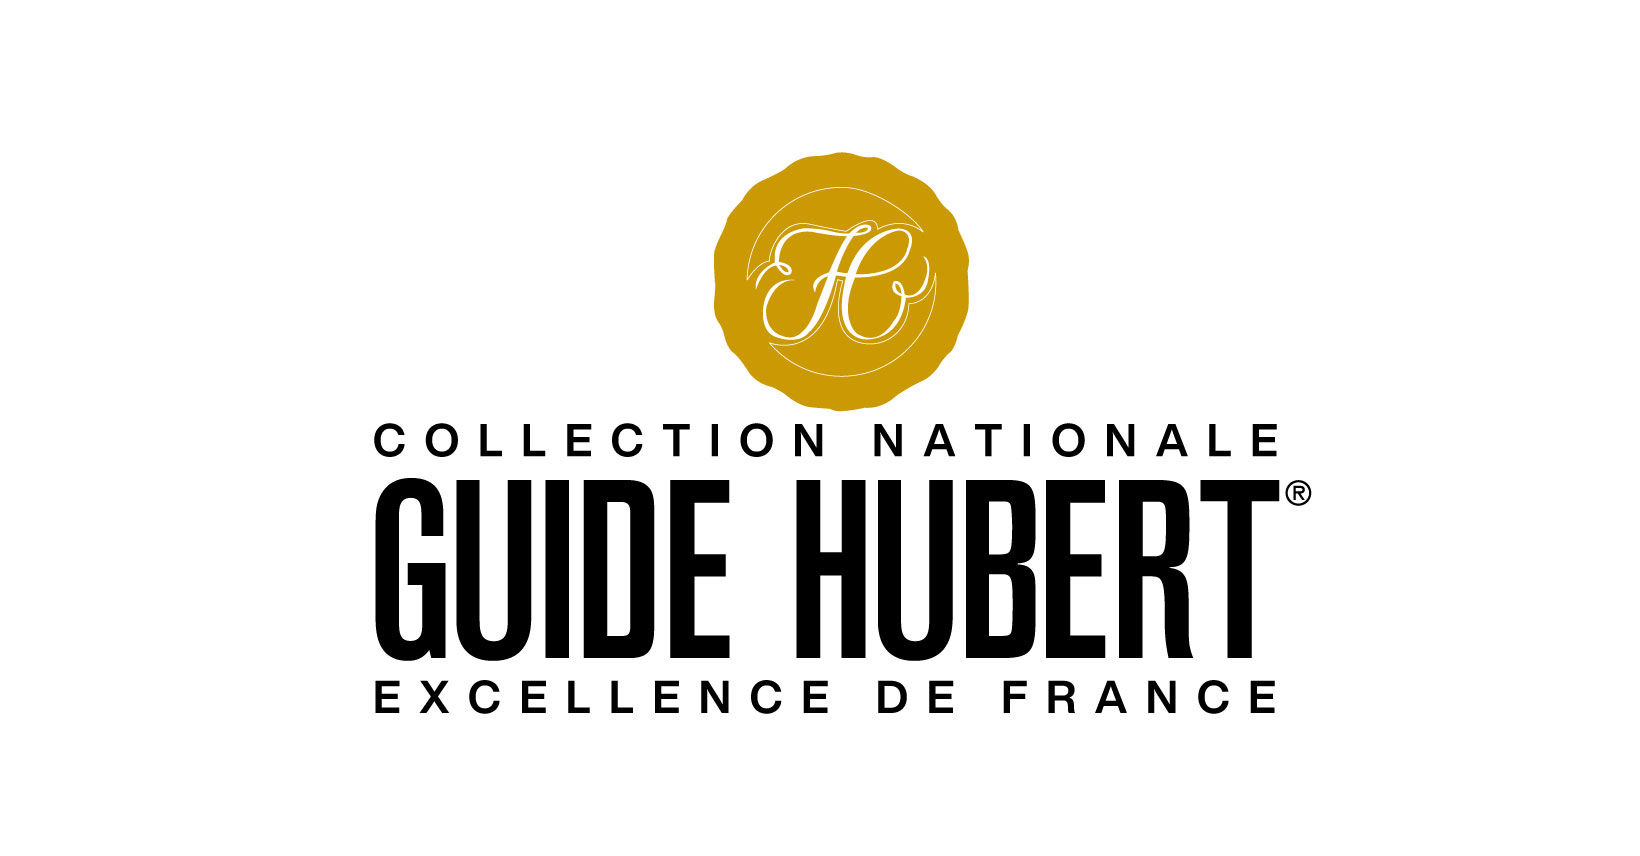 Guide Hubert - Collection Nationale Excellence de France